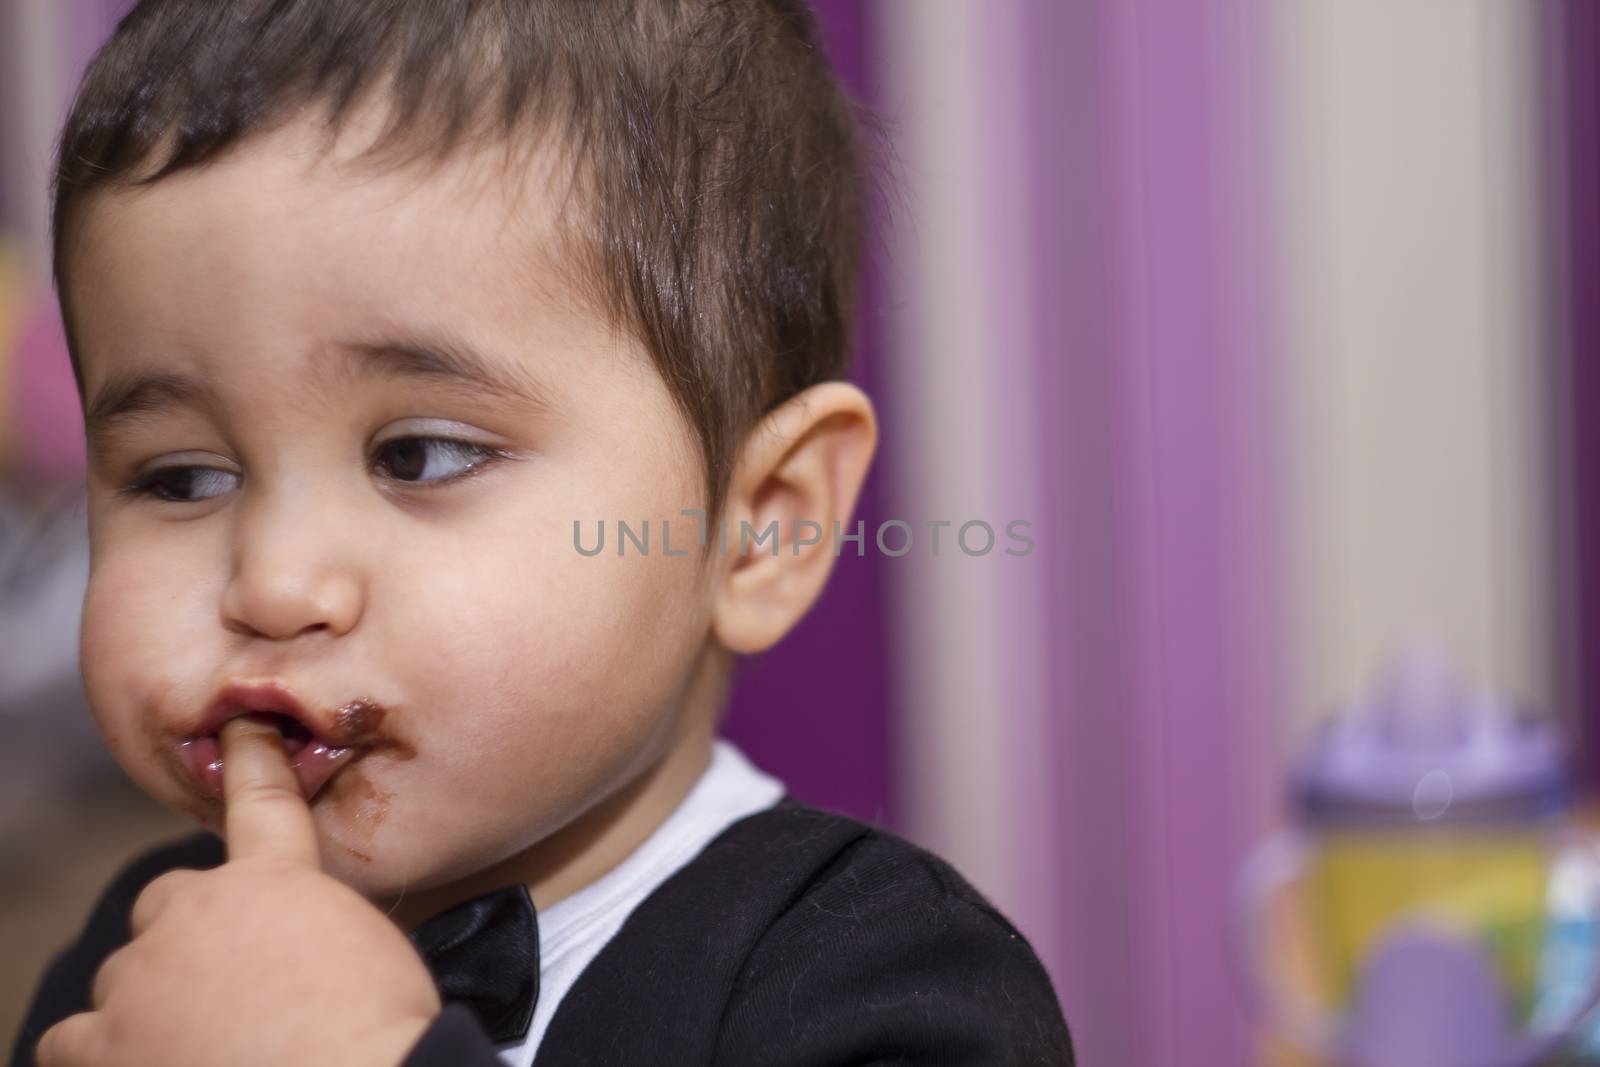 Adorable happy baby eating chocolate, wearing suit and bow tie by FernandoCortes